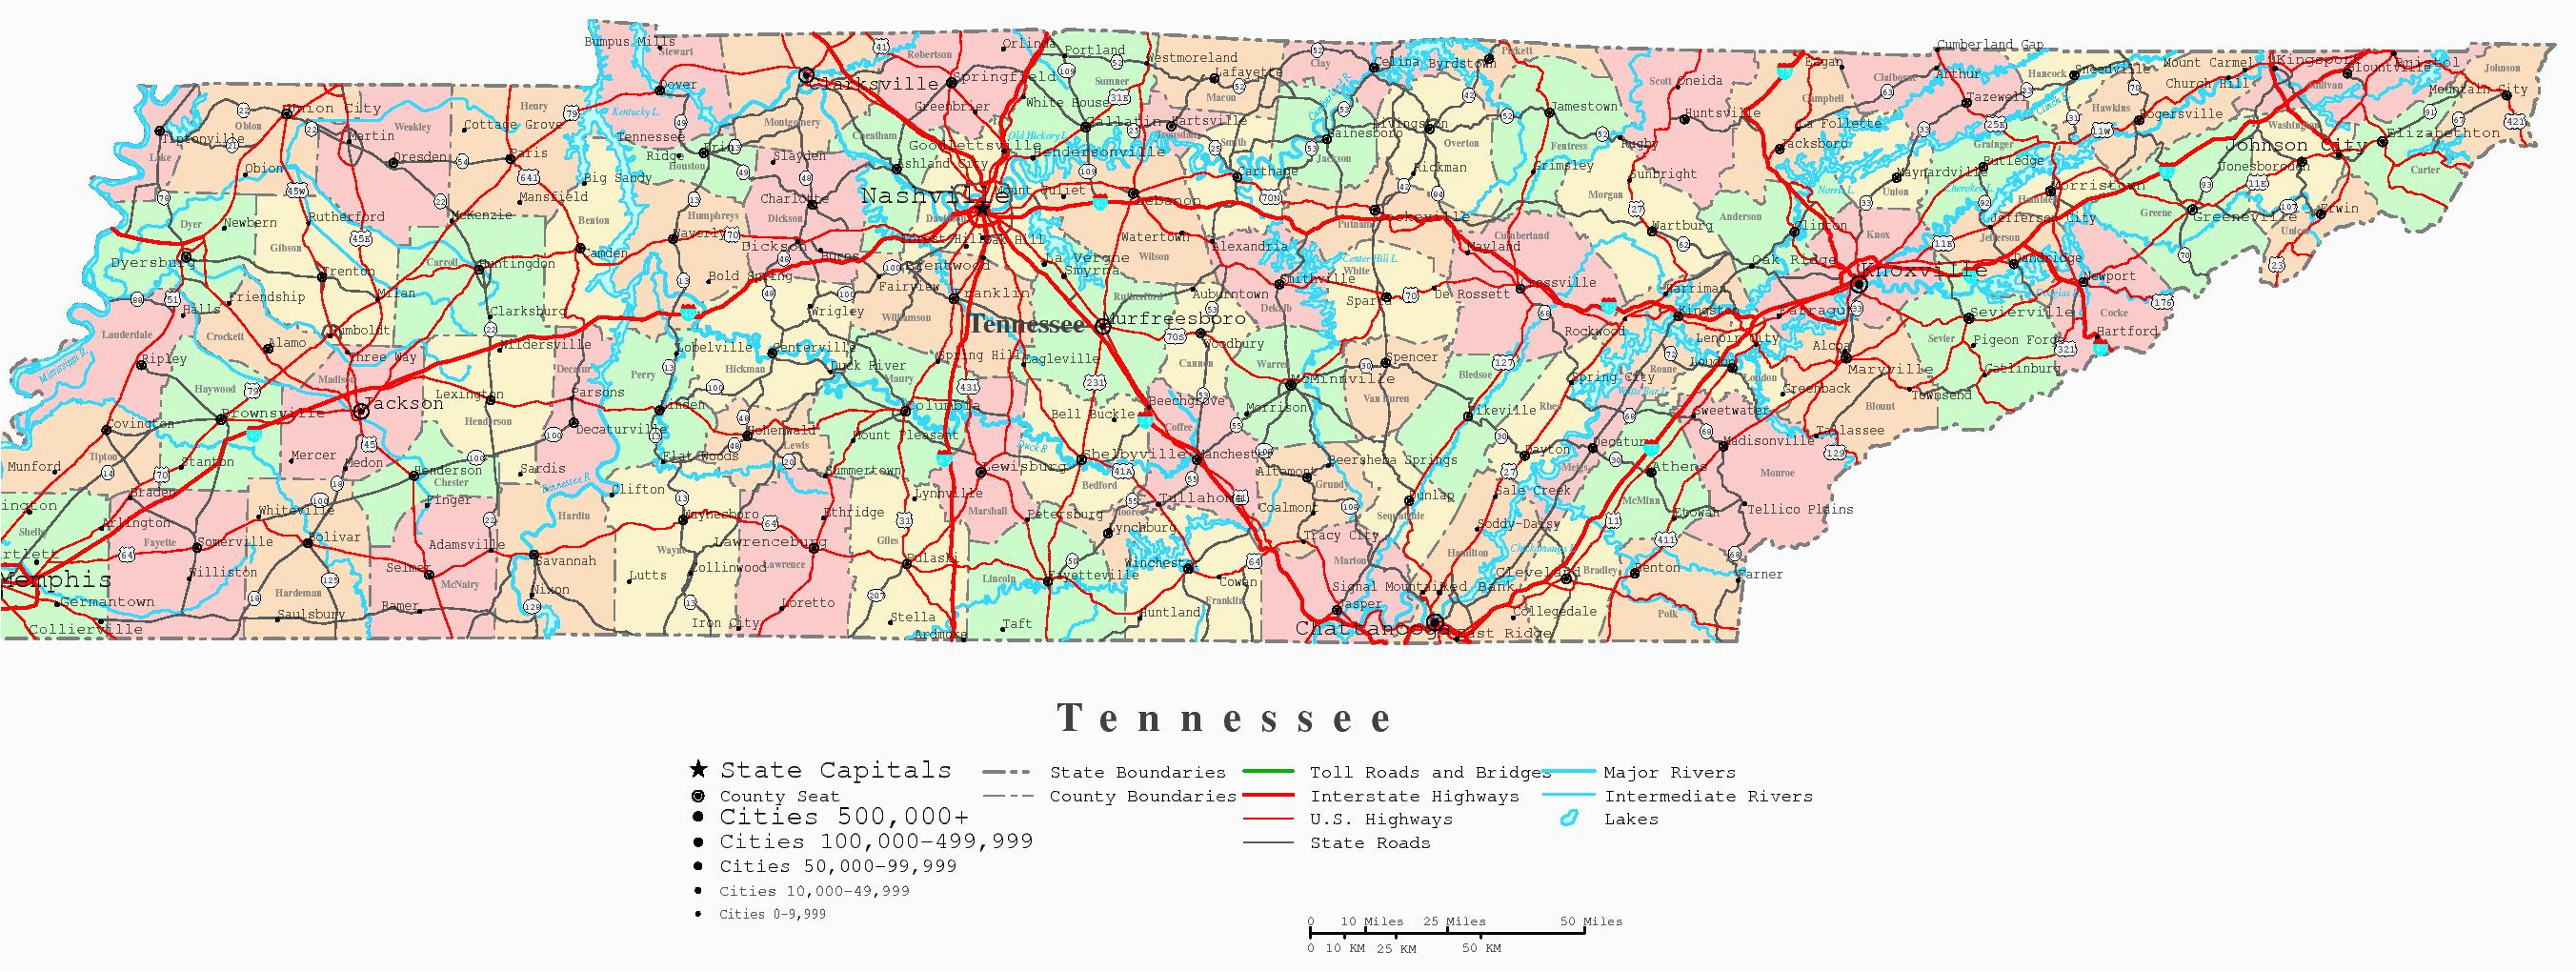 Printable Map Of Tennessee Counties | secretmuseum